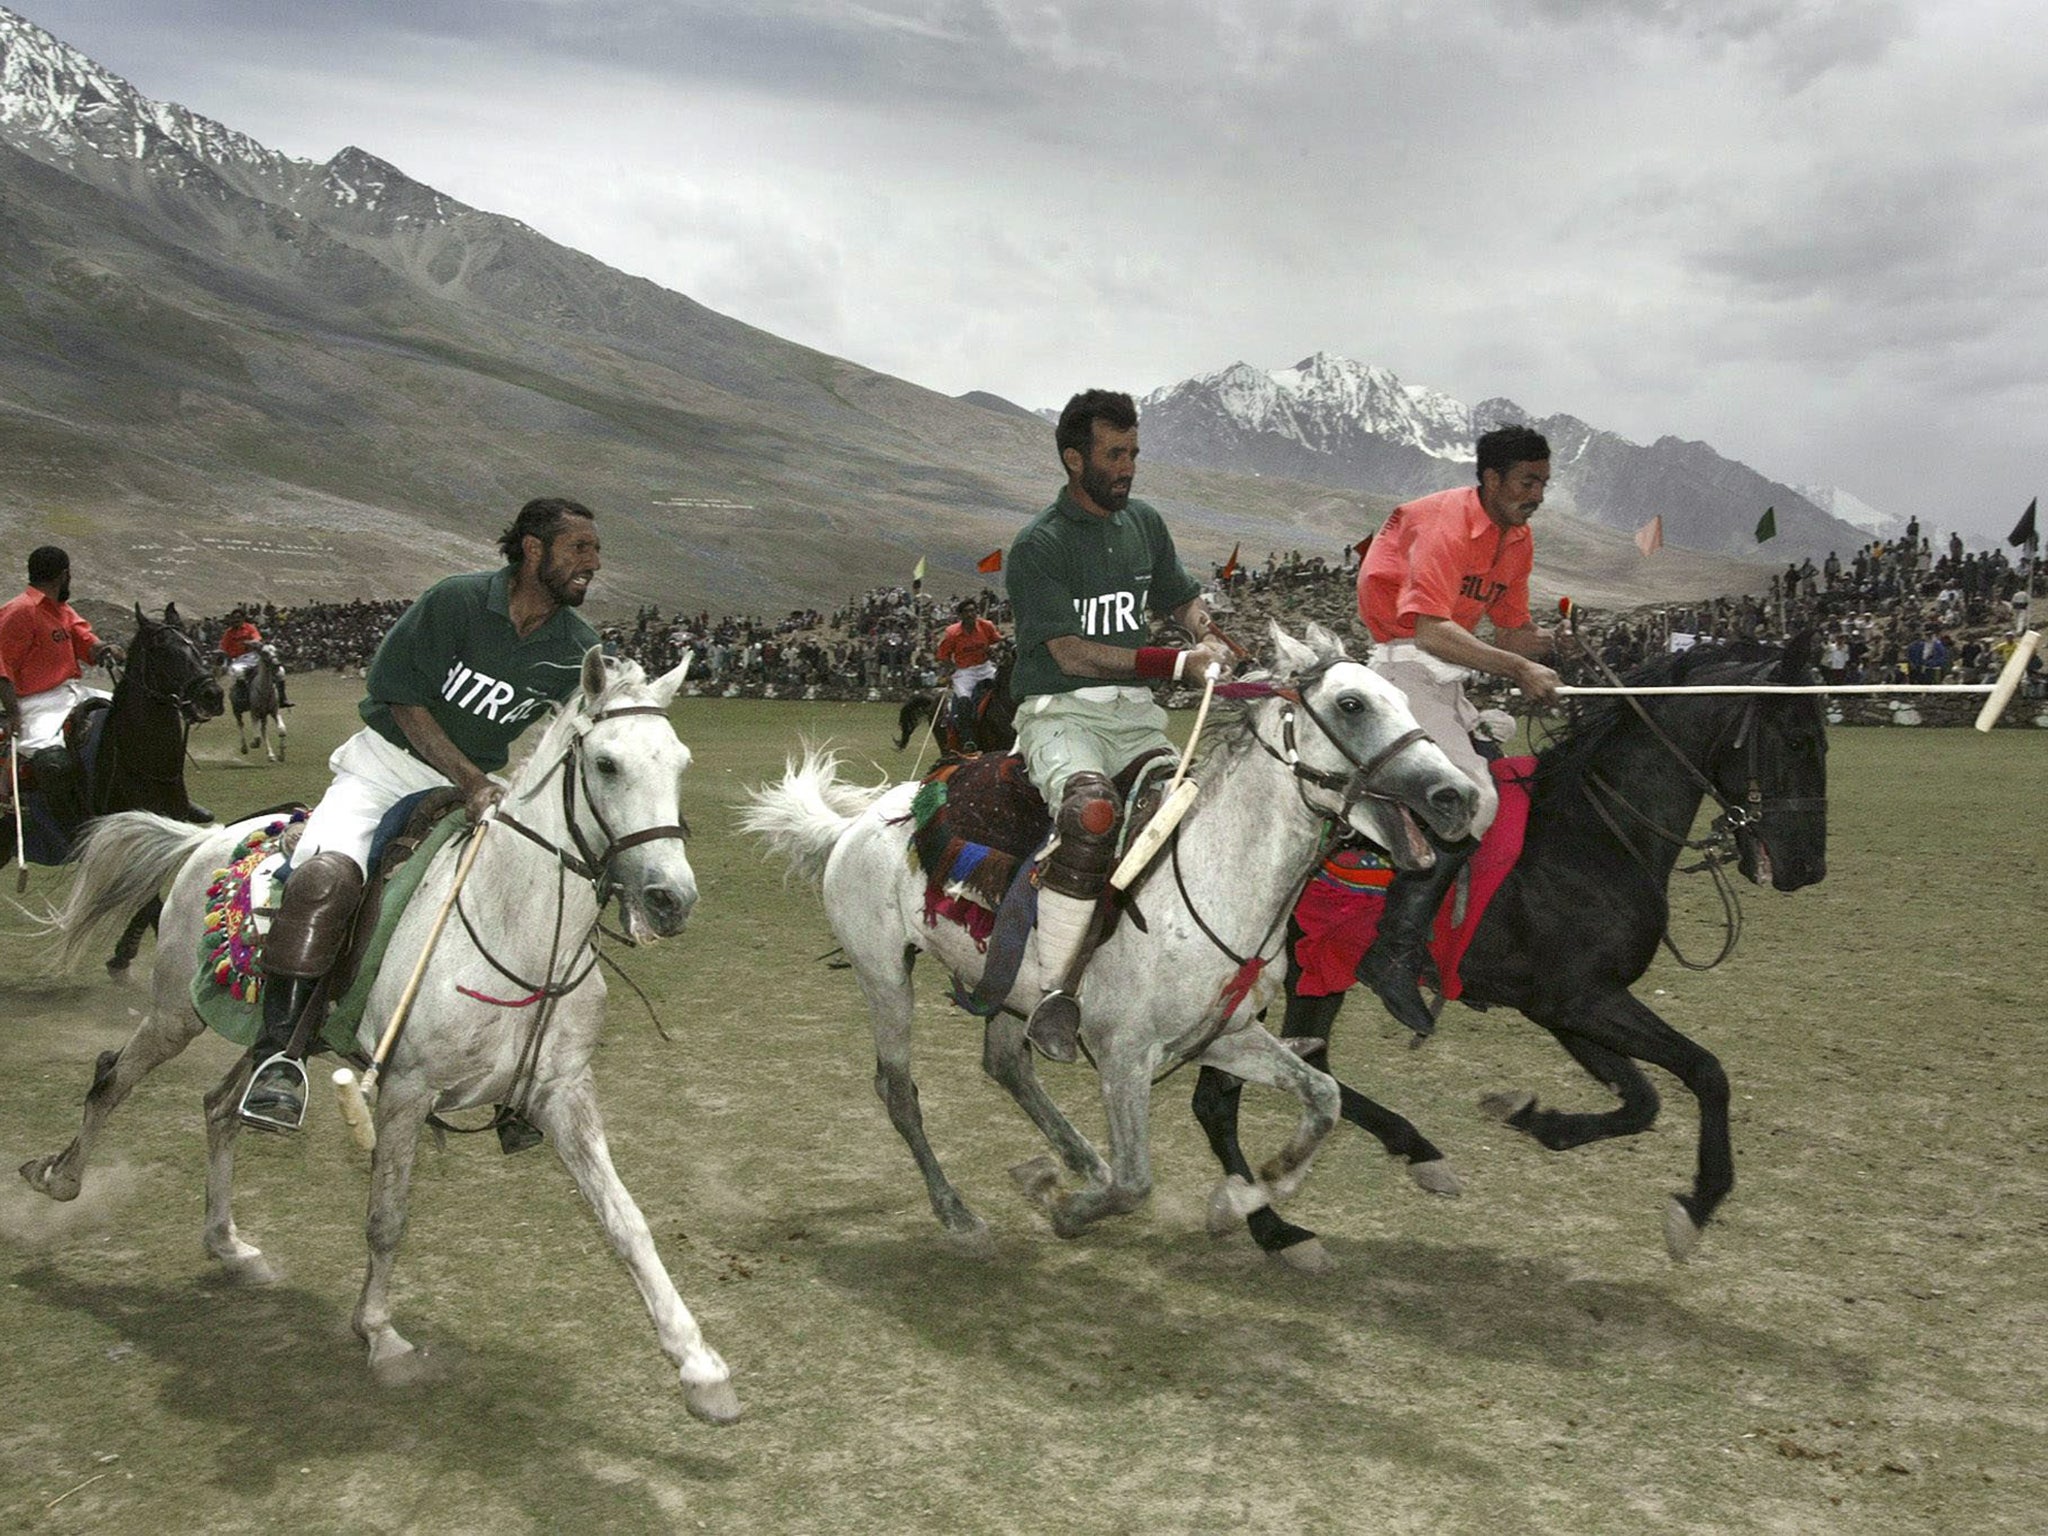 A polo match takes place in Chitral